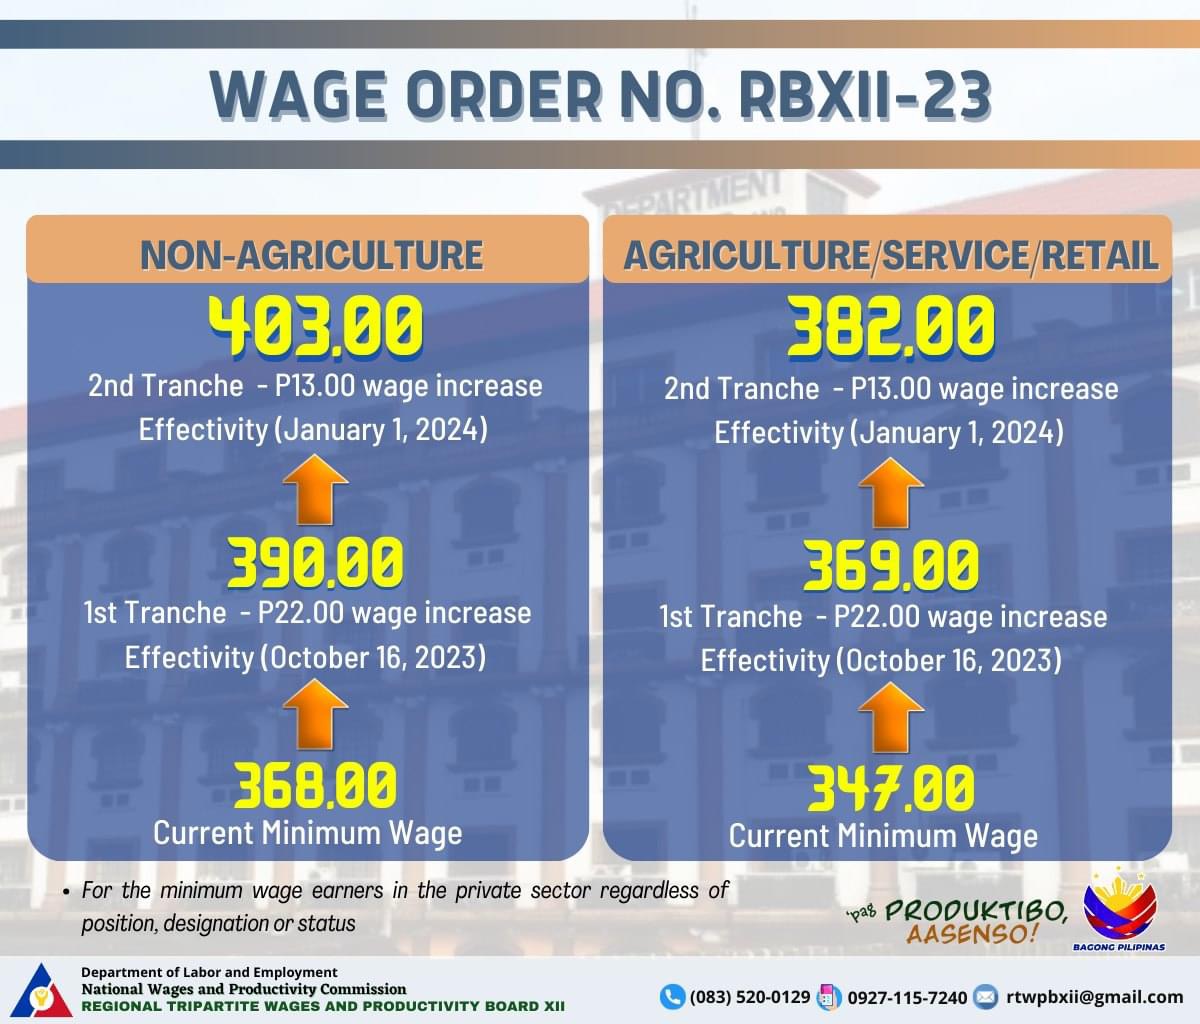 PIA RTWPB XII approves pay hikes for minimum wage earners and